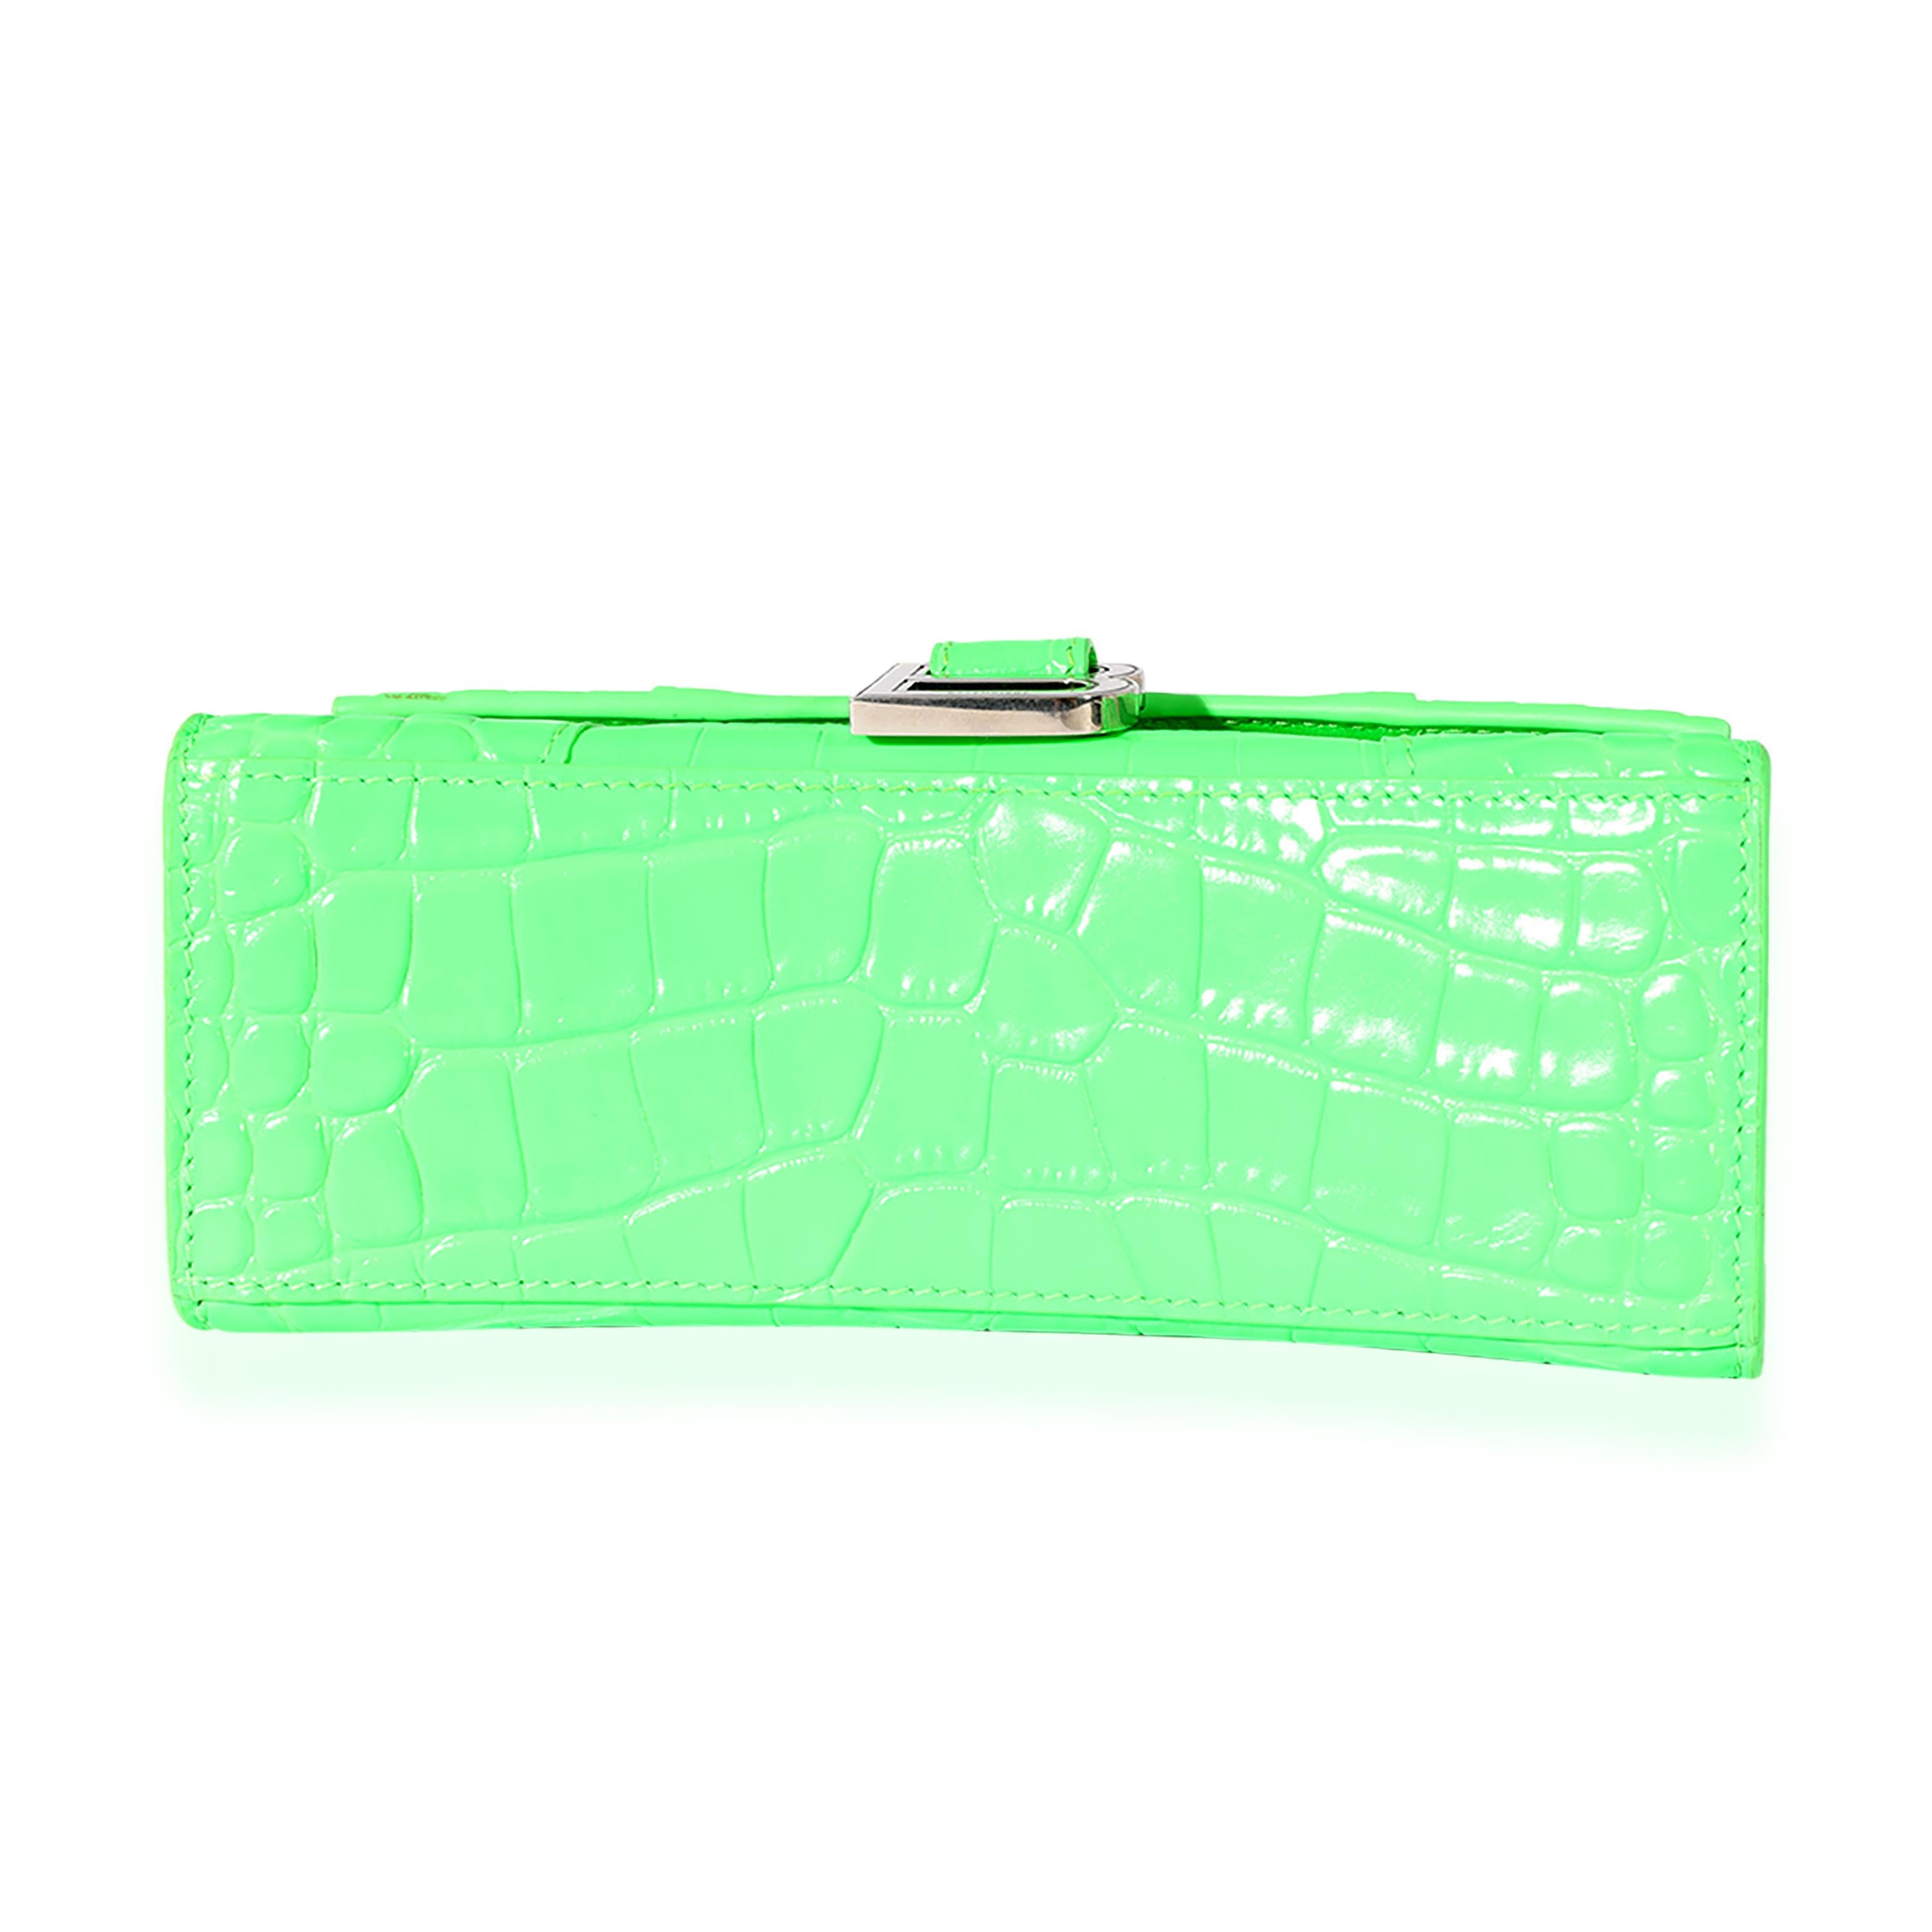 Listing Title: Balenciaga Green Croc Embossed Calfskin XS Hourglass Bag
SKU: 125487
MSRP: 2700.00
Condition: Pre-owned 
Handbag Condition: Very Good
Condition Comments: Very Good Condition. Light discoloration to exterior. Hairline scratching to